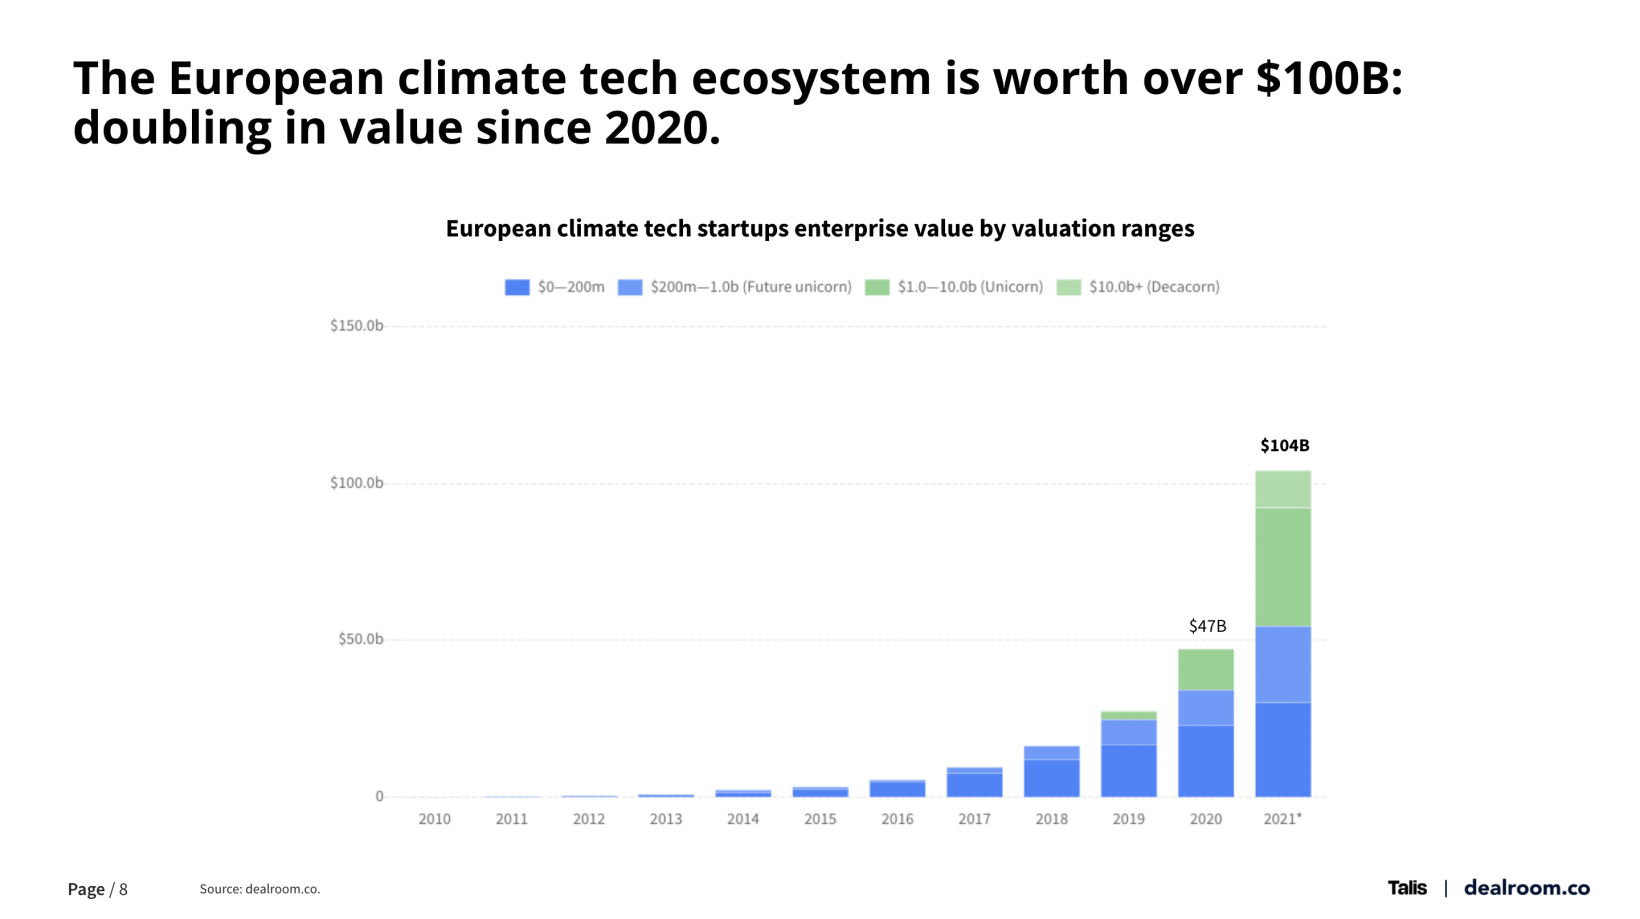 Graph displaying value of European climate tech ecosystem in 2021